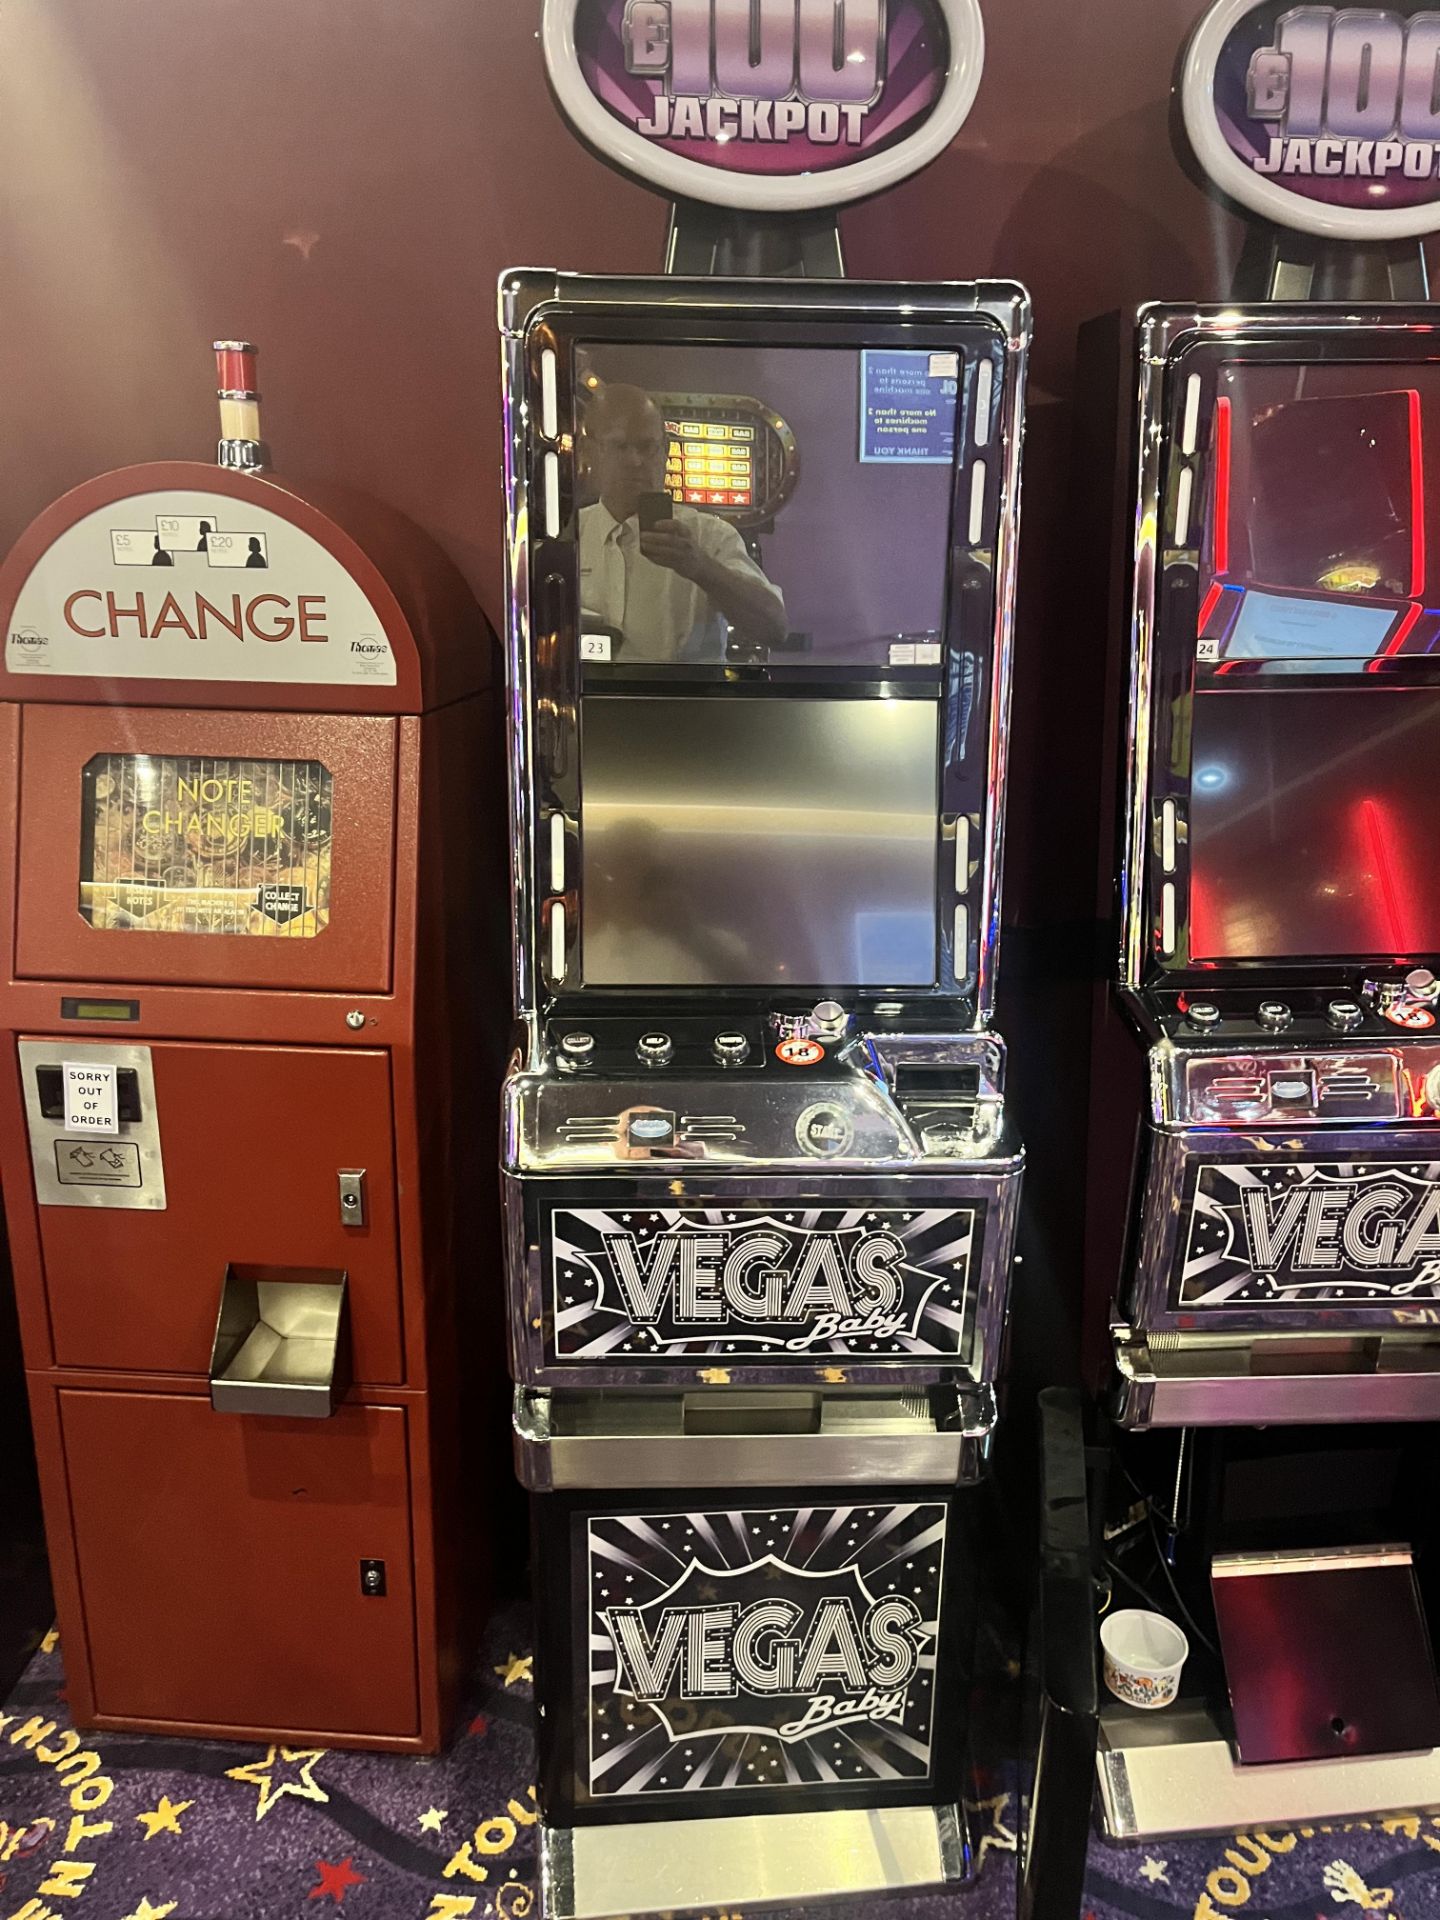 *Vagas Baby by Barcrest Category C Gaming Machine (machine no. 23)